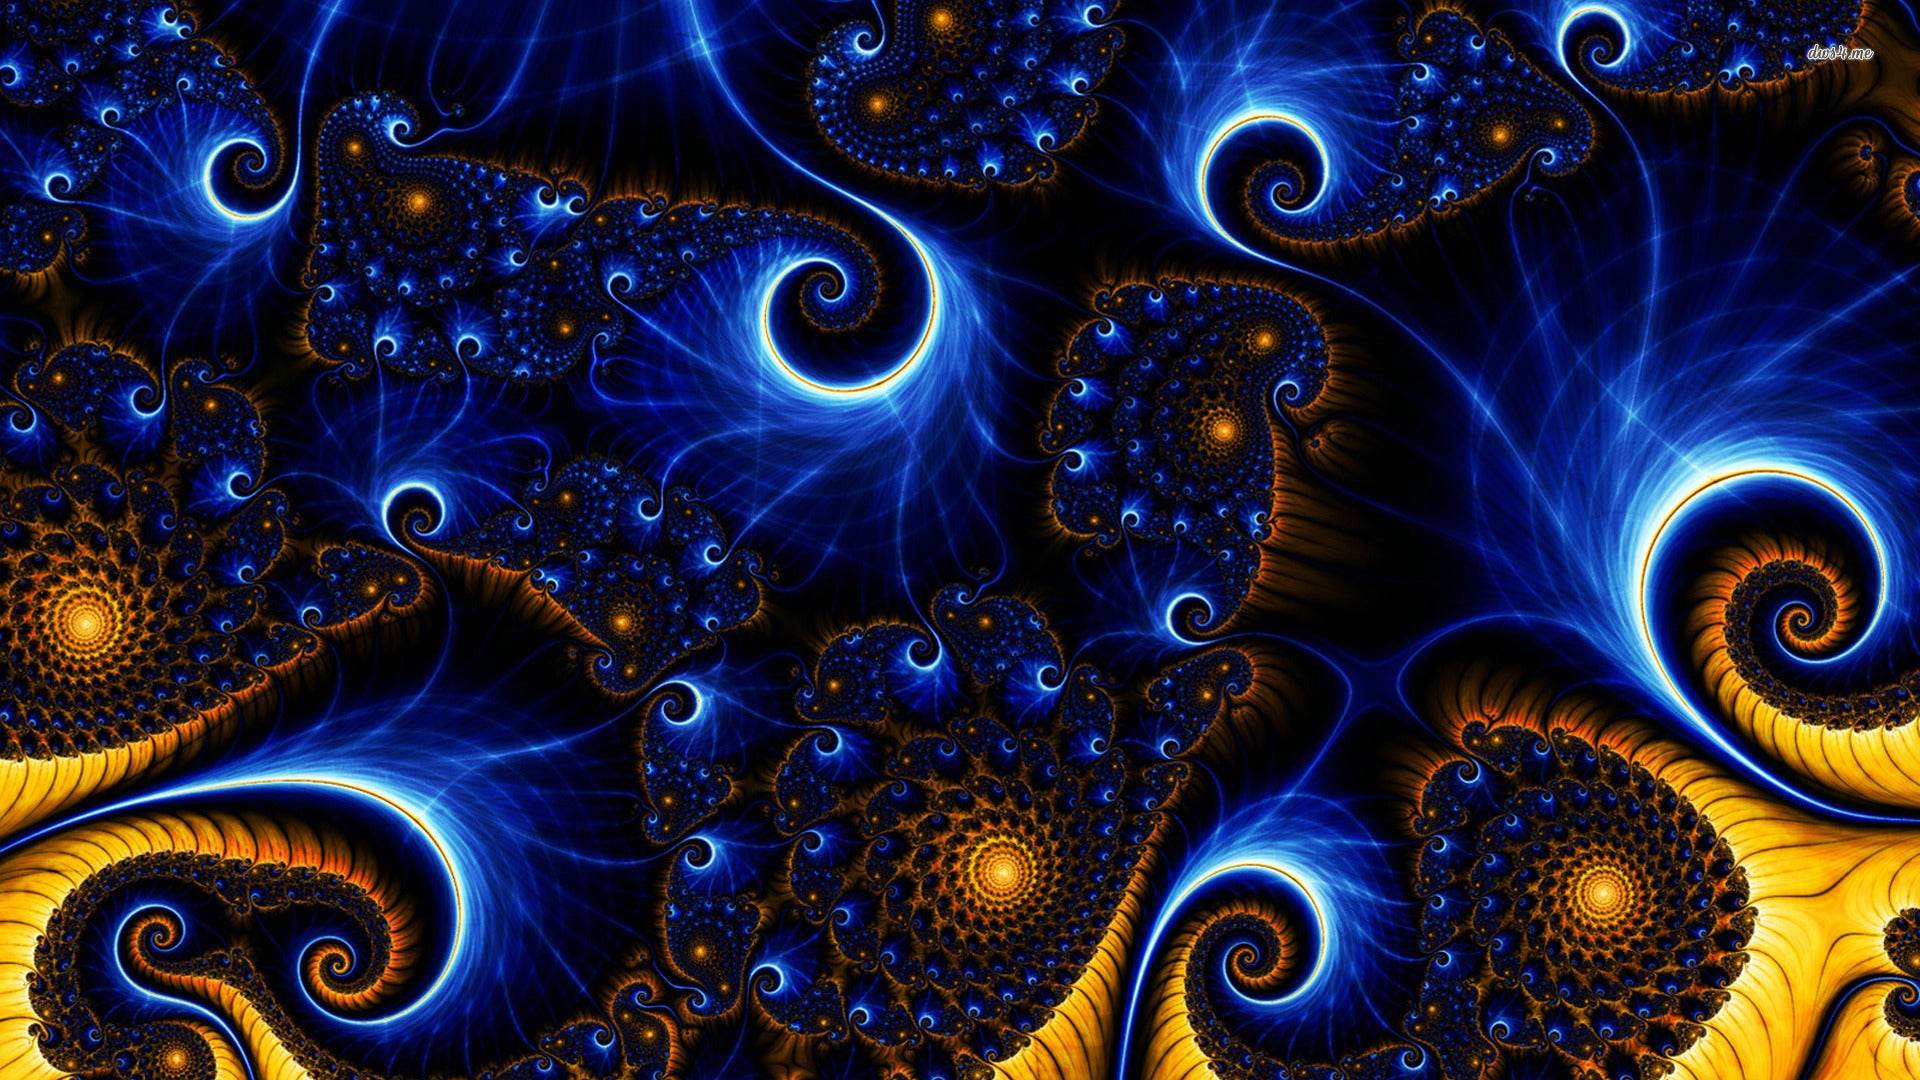 Weekly Wallpaper: Go Fractal And Straddle The Line Between Maths And